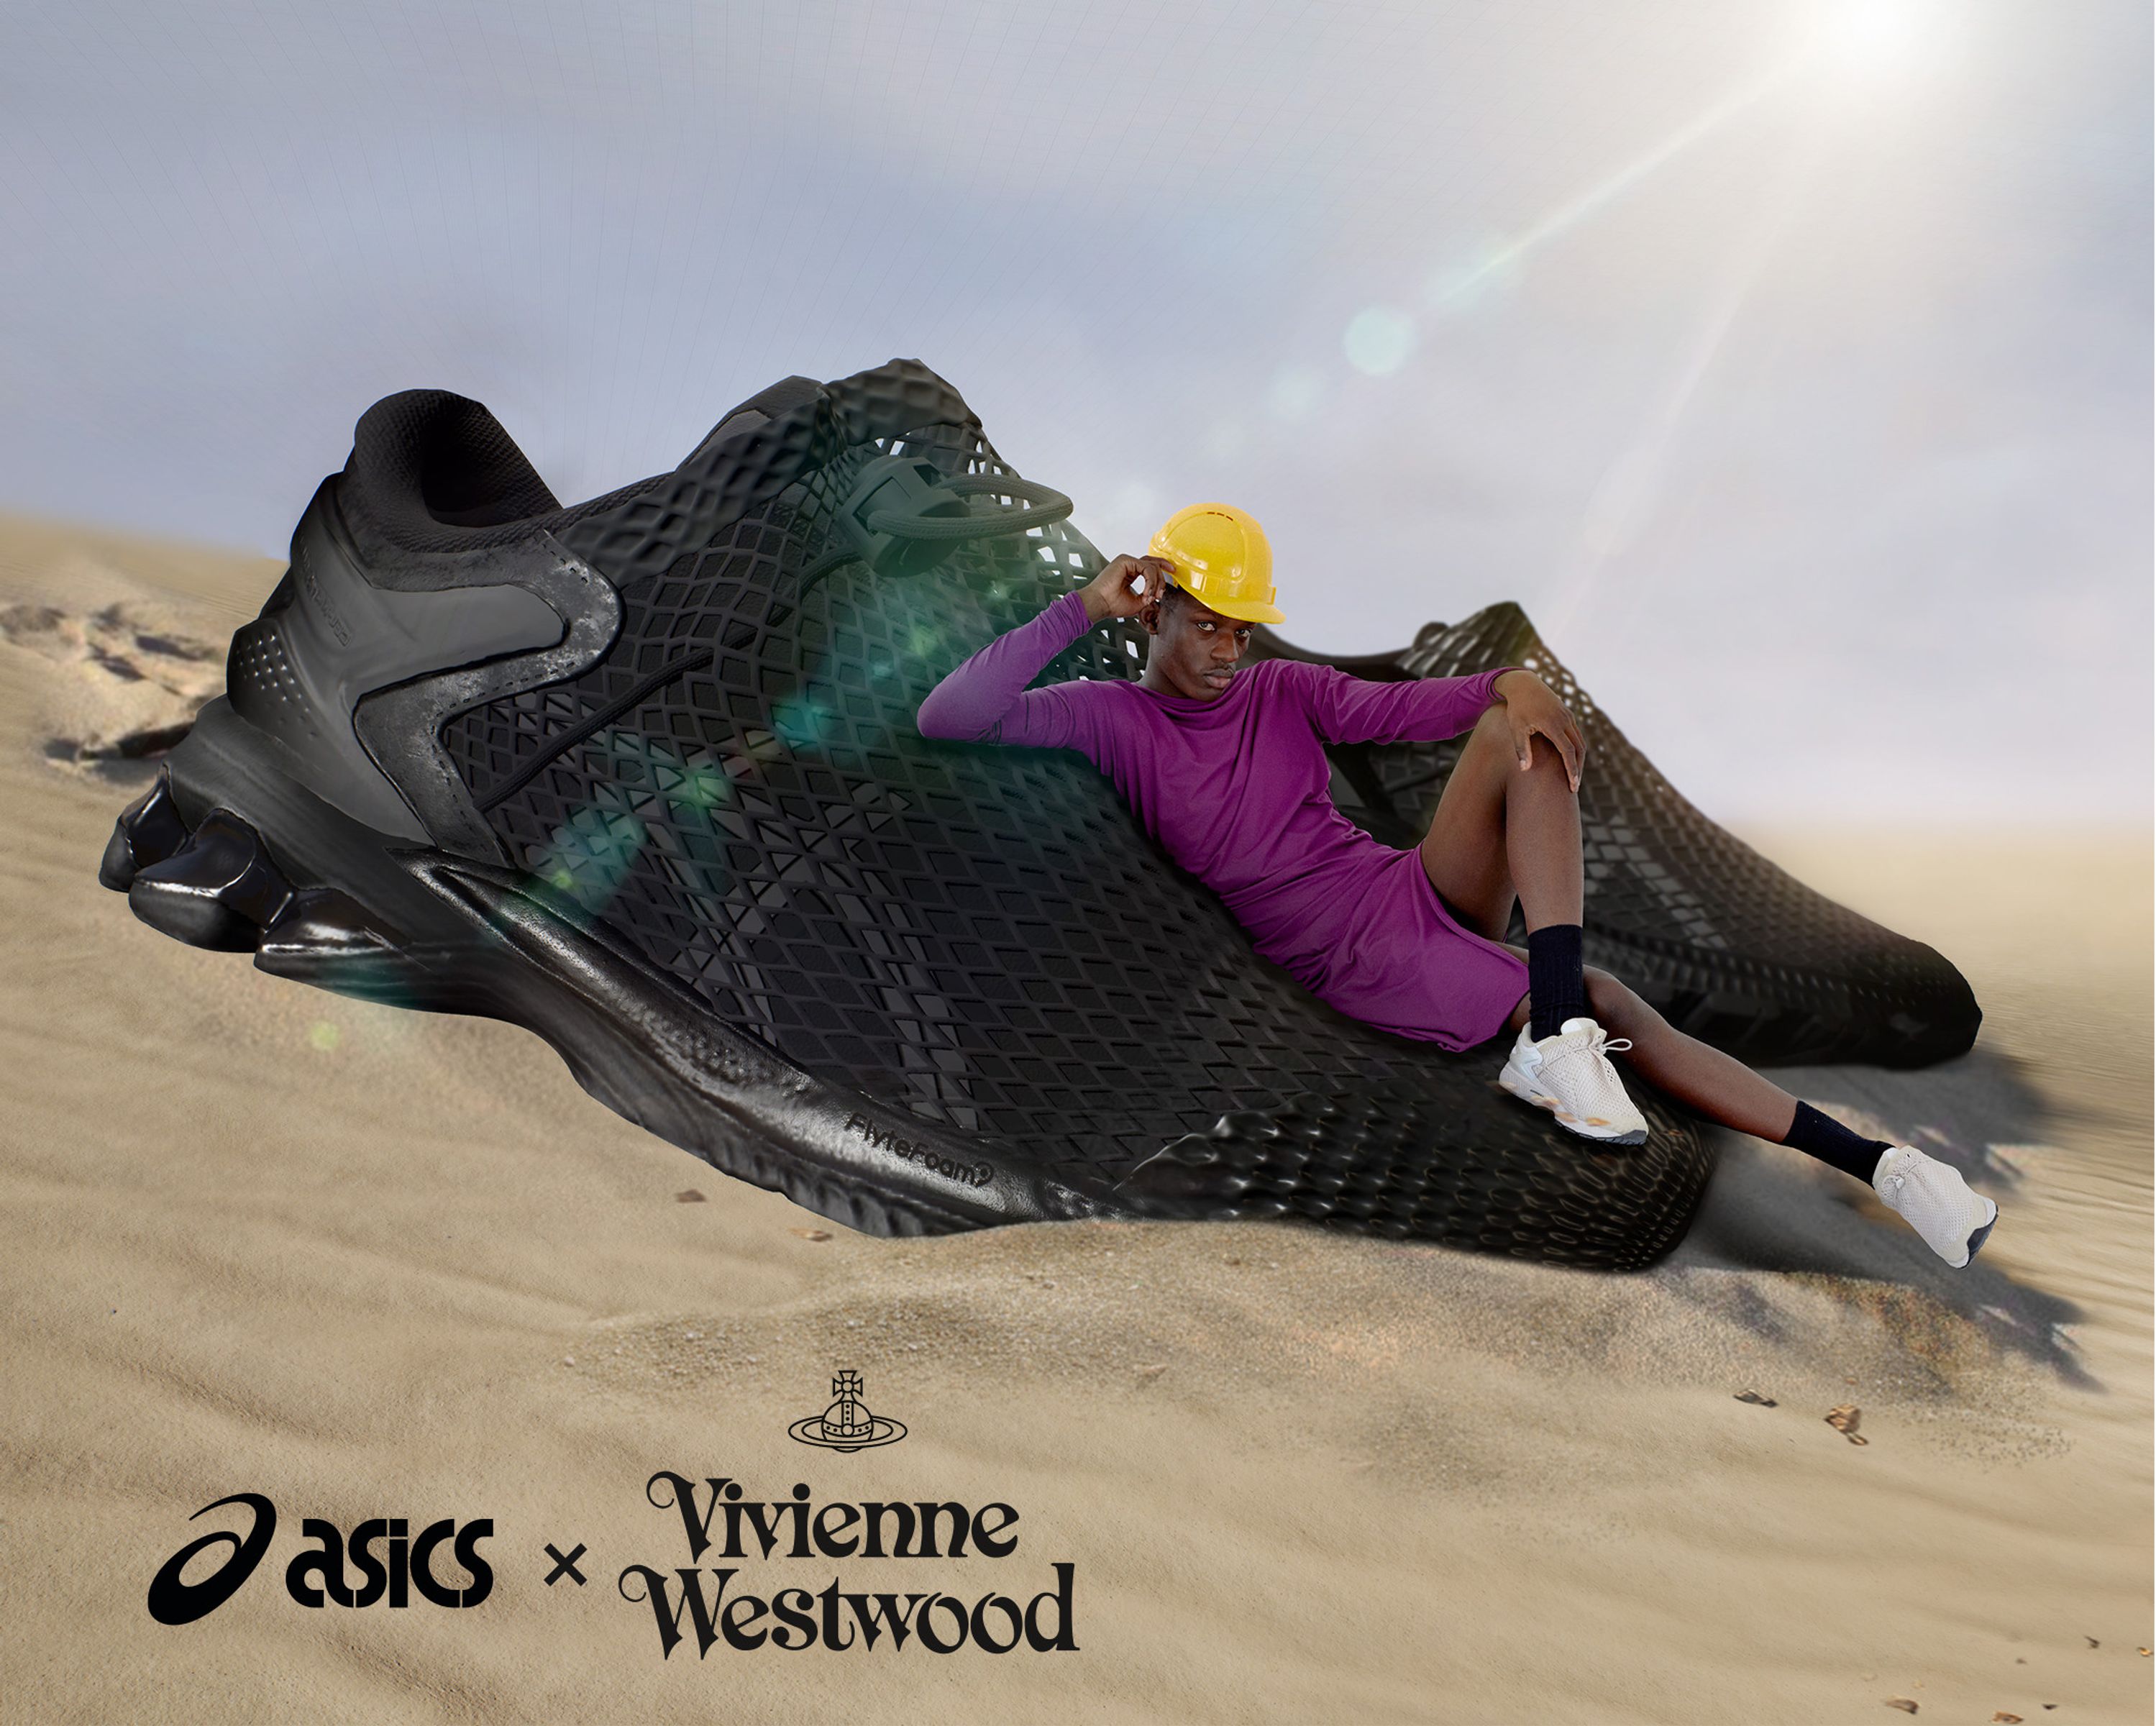 Asics x Vivienne Westwood FW21 - Paolo Colaiocco styled by Sabina Schreder